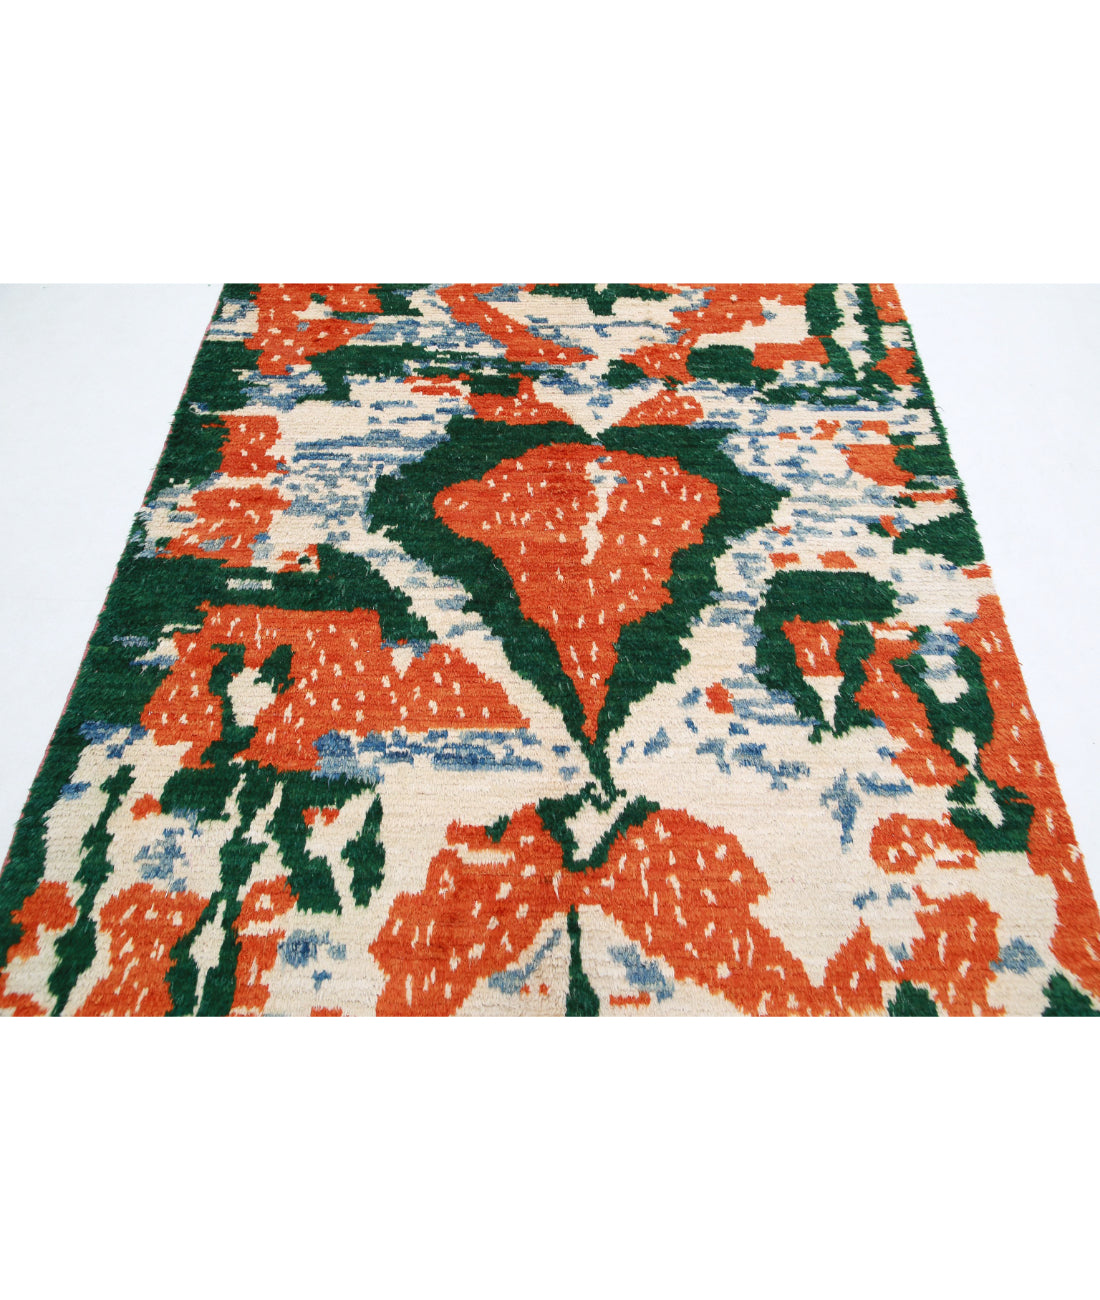 Hand Knotted Tribal Moroccan Wool Rug - 5'1'' x 7'7'' 5'1'' x 7'7'' (153 X 228) / Multi / Multi